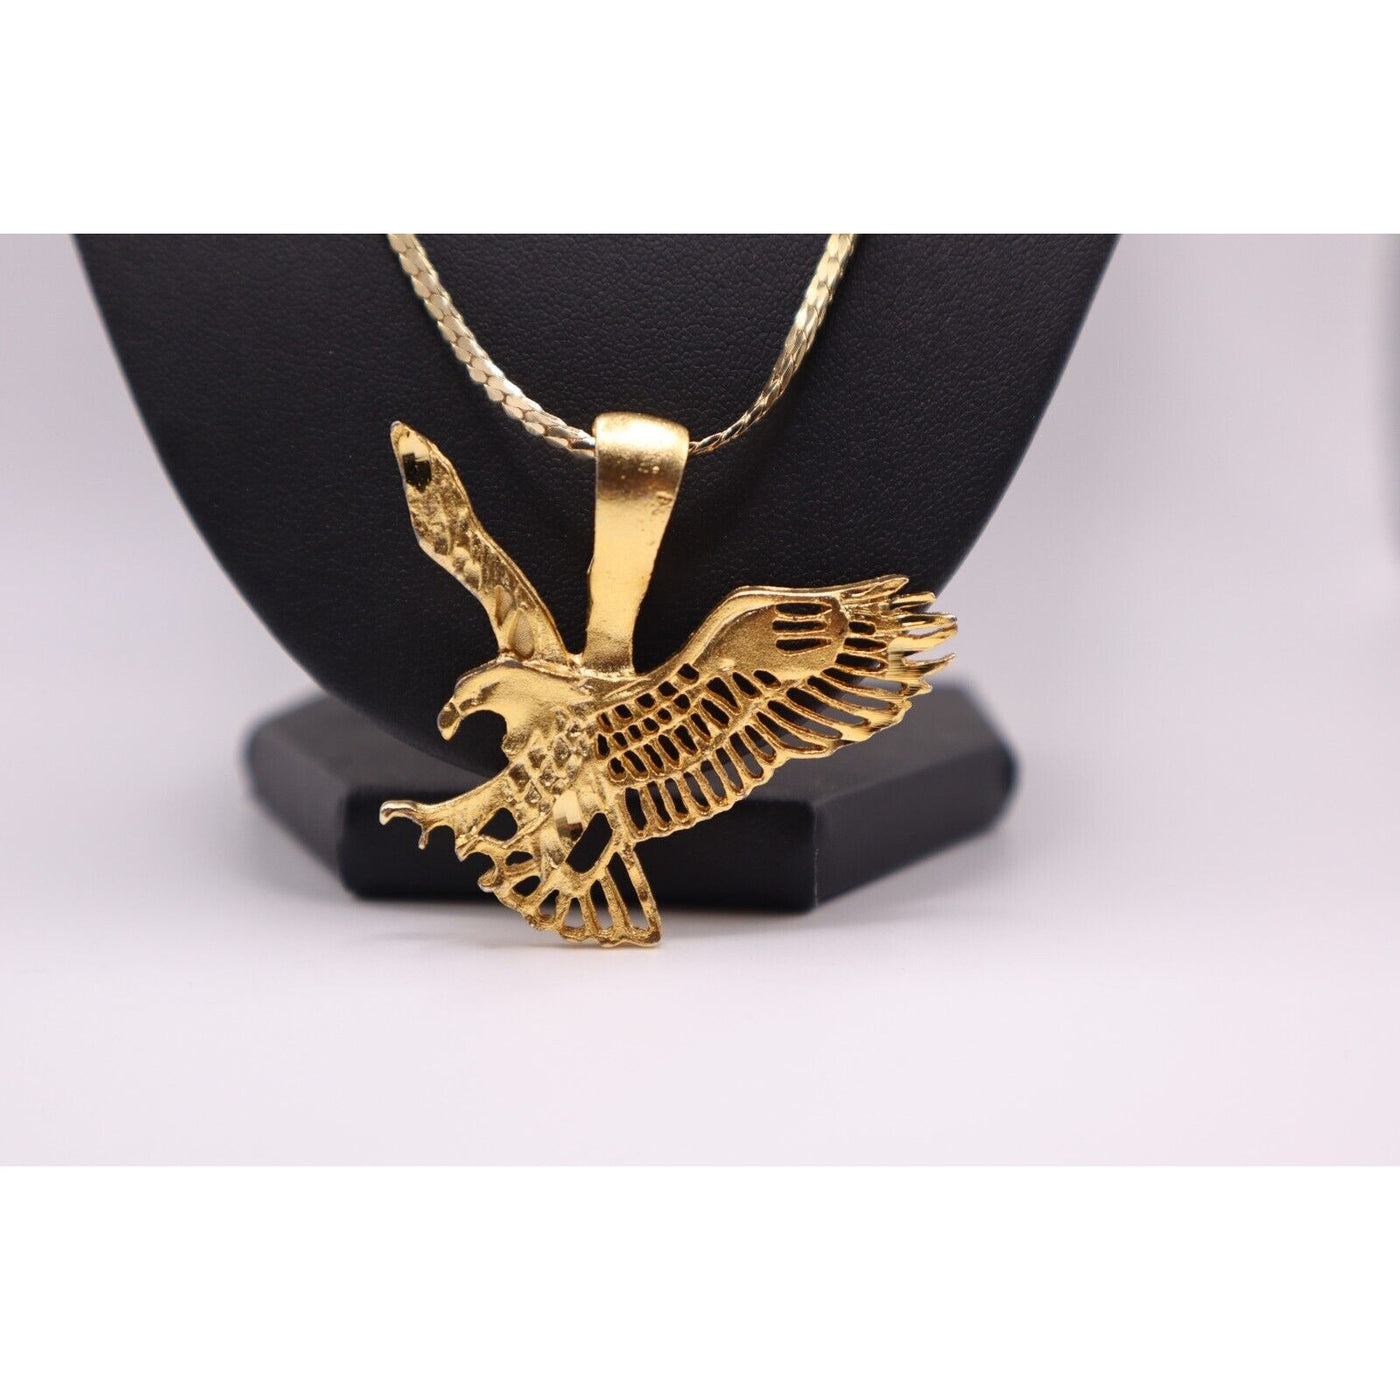 Unisex Gold Plated Necklace with Free Eagle Pendant